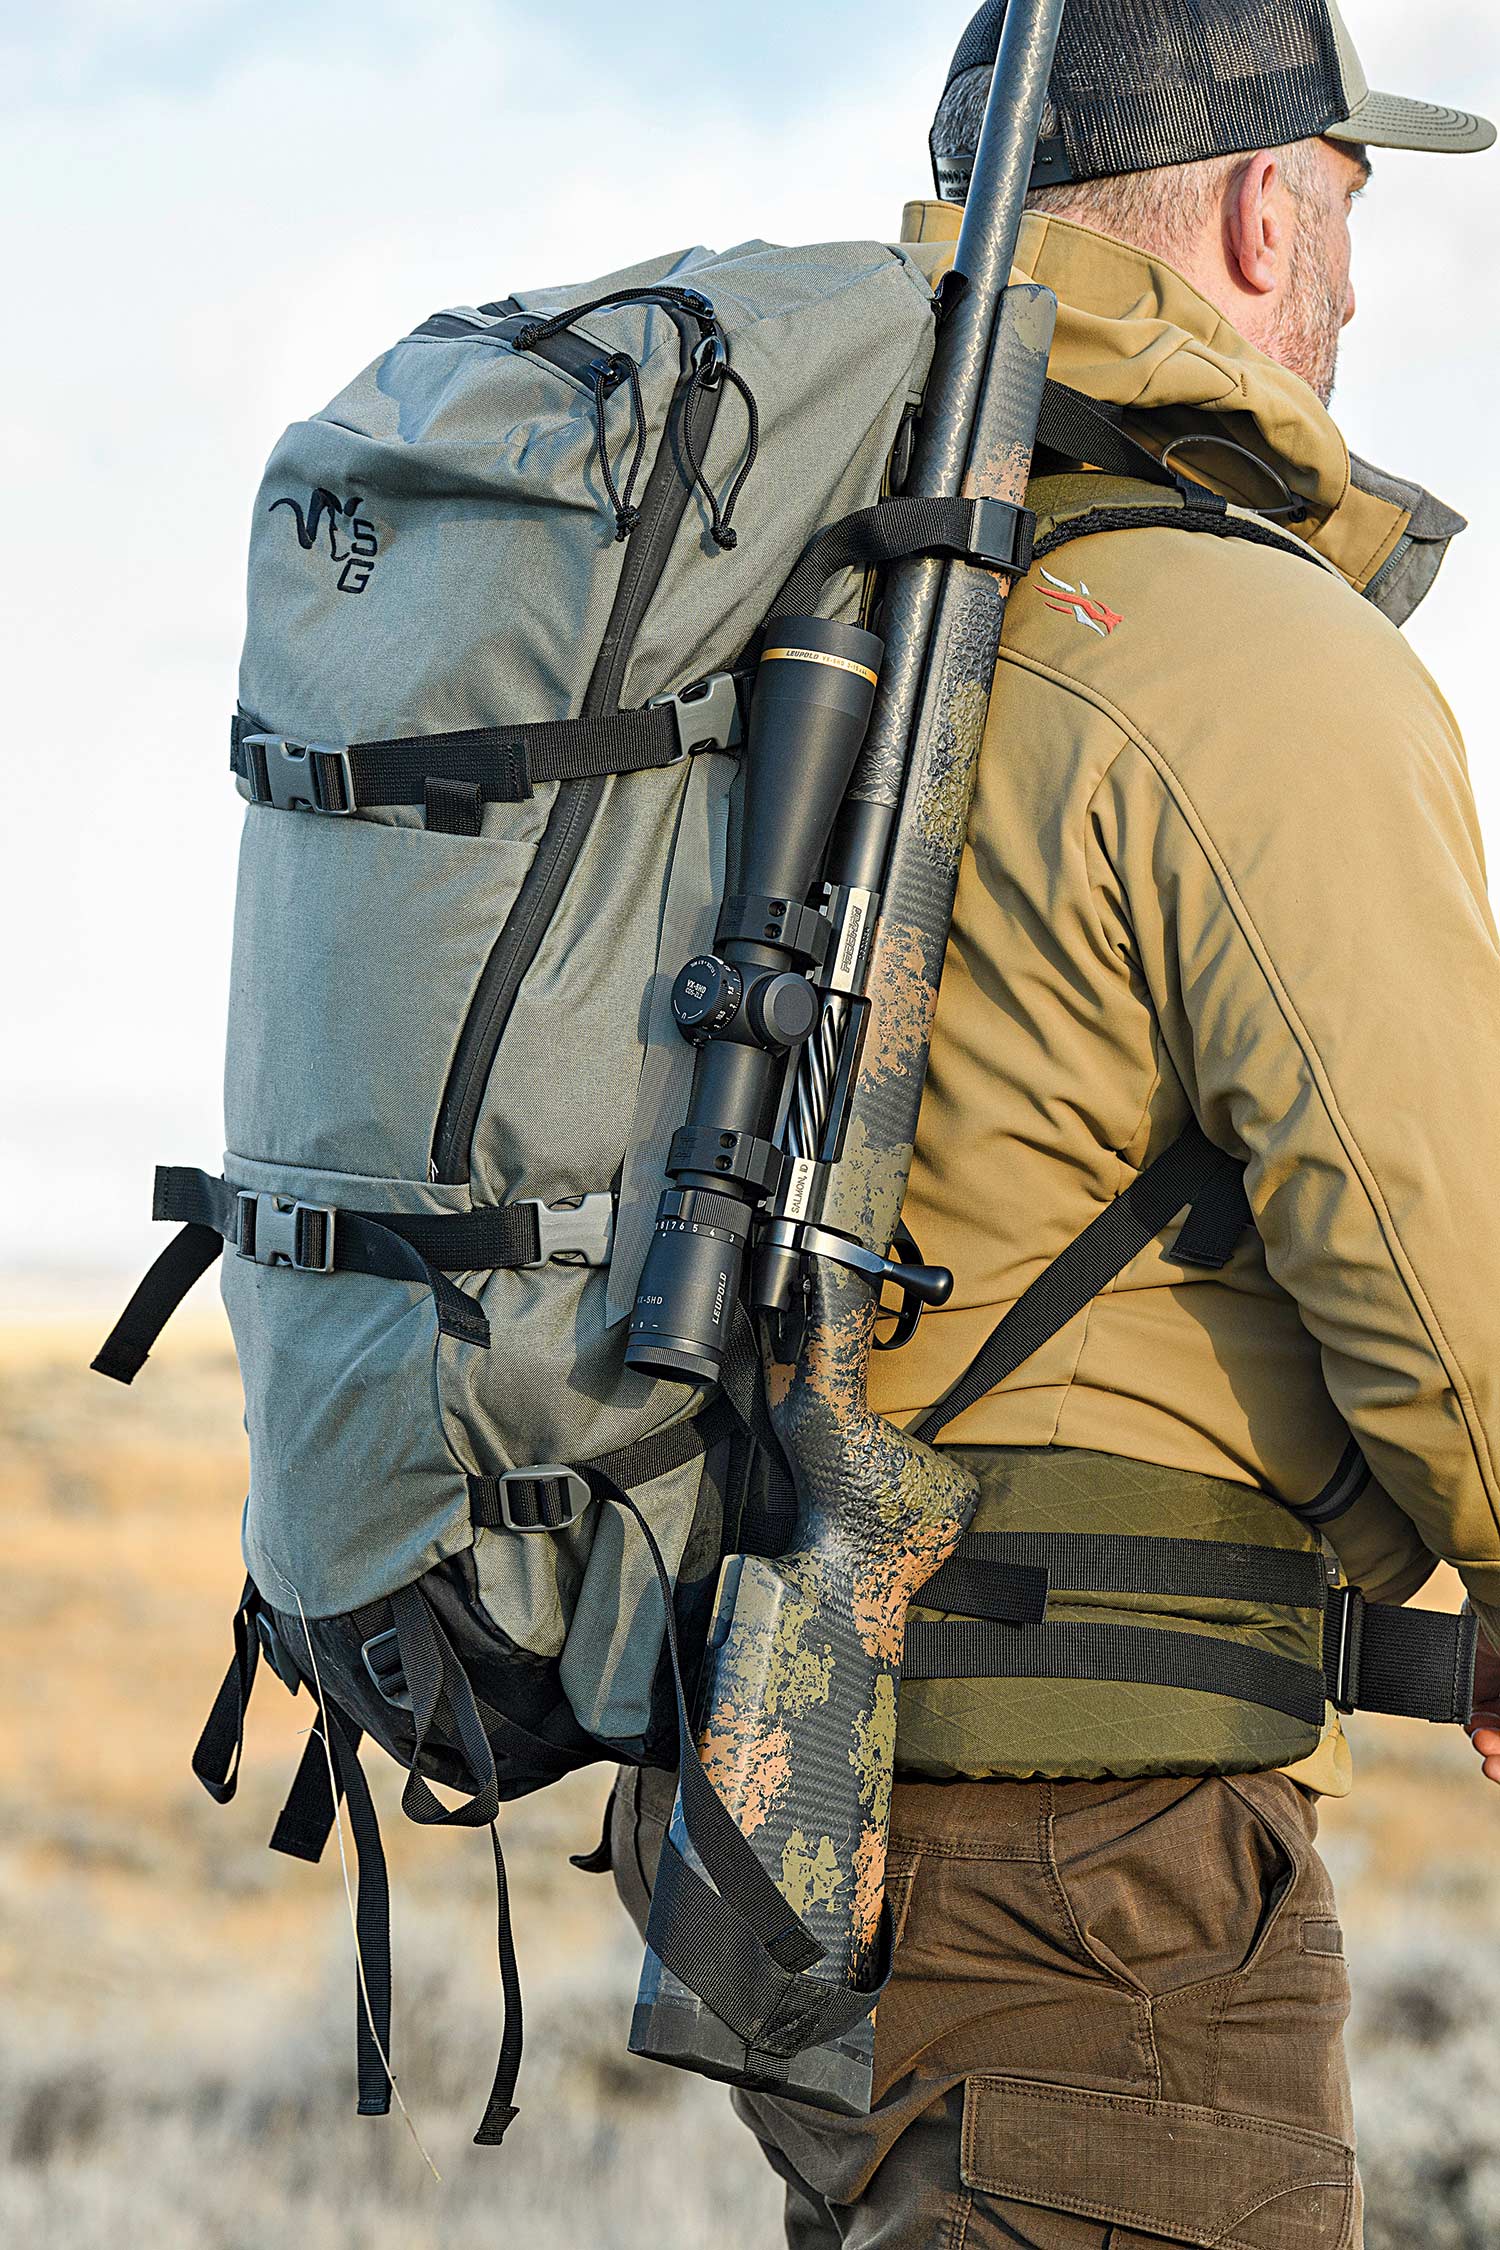 Hunter walking through a field with a backpack and rifle.